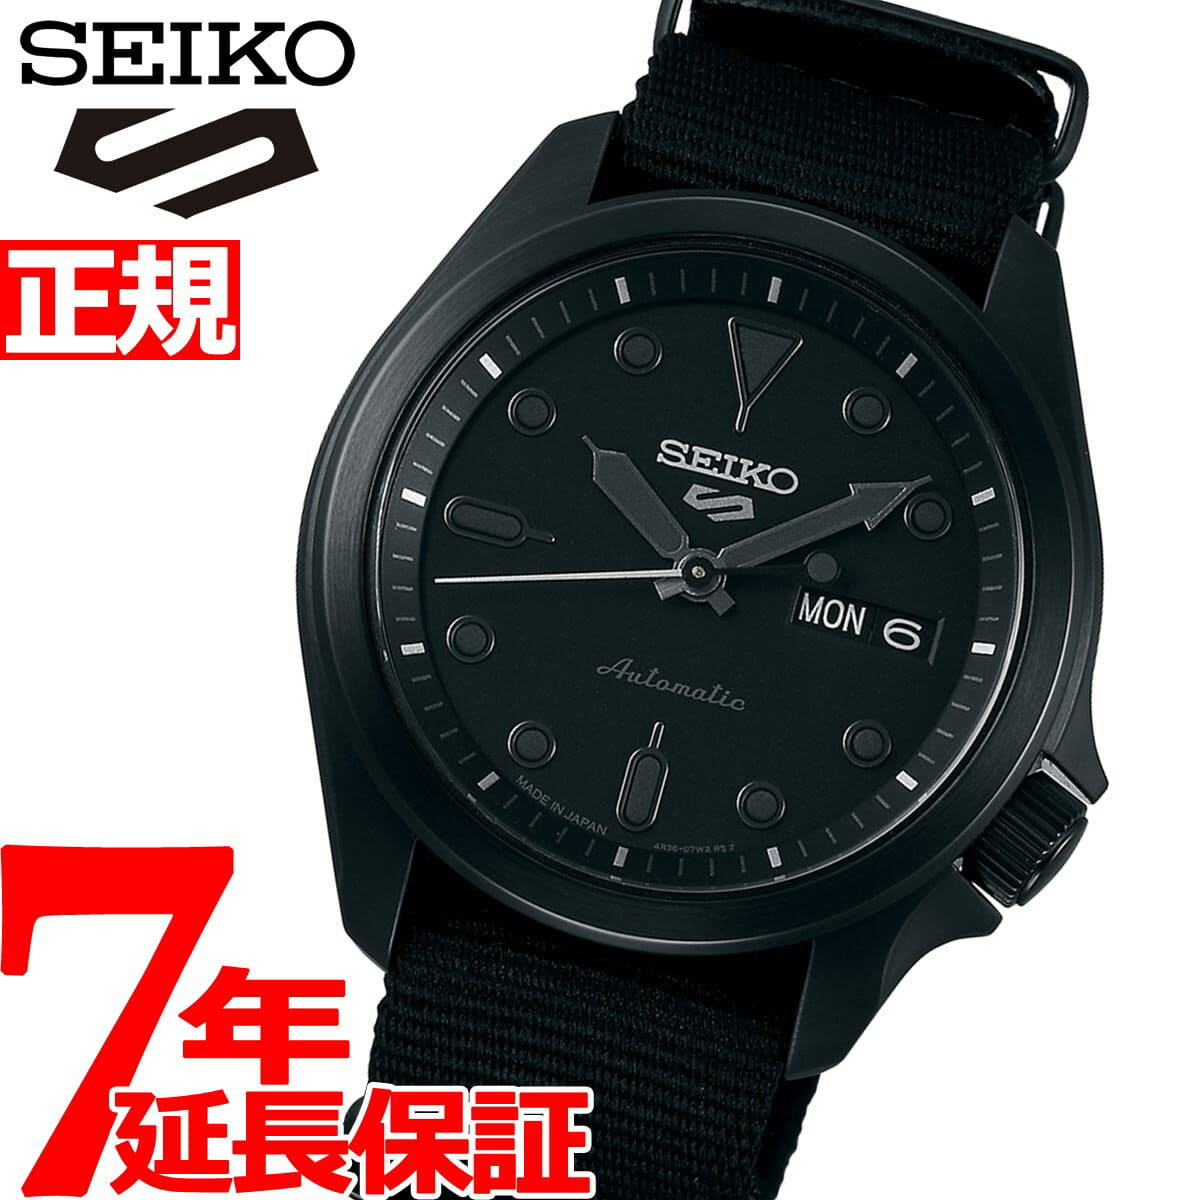 New]SEIKO 5 SPORTS Men's Automatic Mechanical Watch Limited Model SBSA059 -  BE FORWARD Store